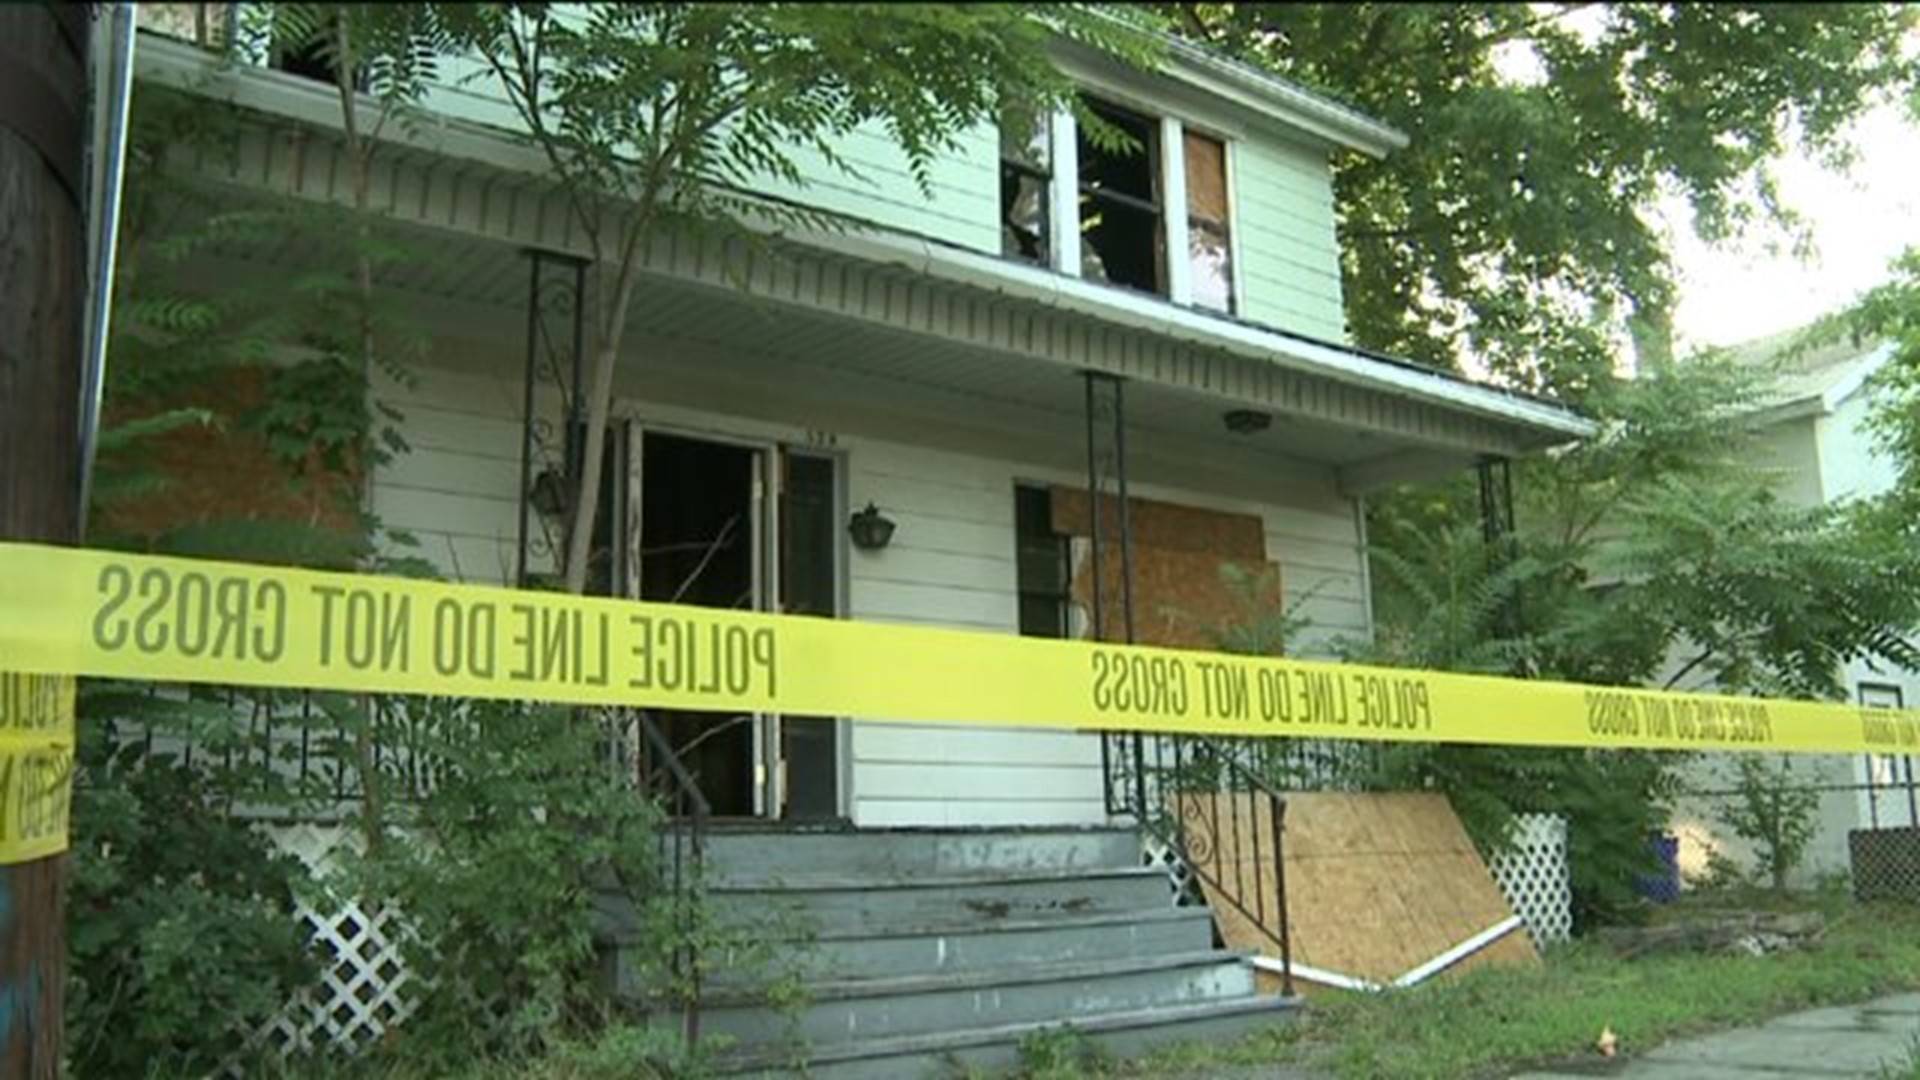 Fire in Vacant House Listed as Arson